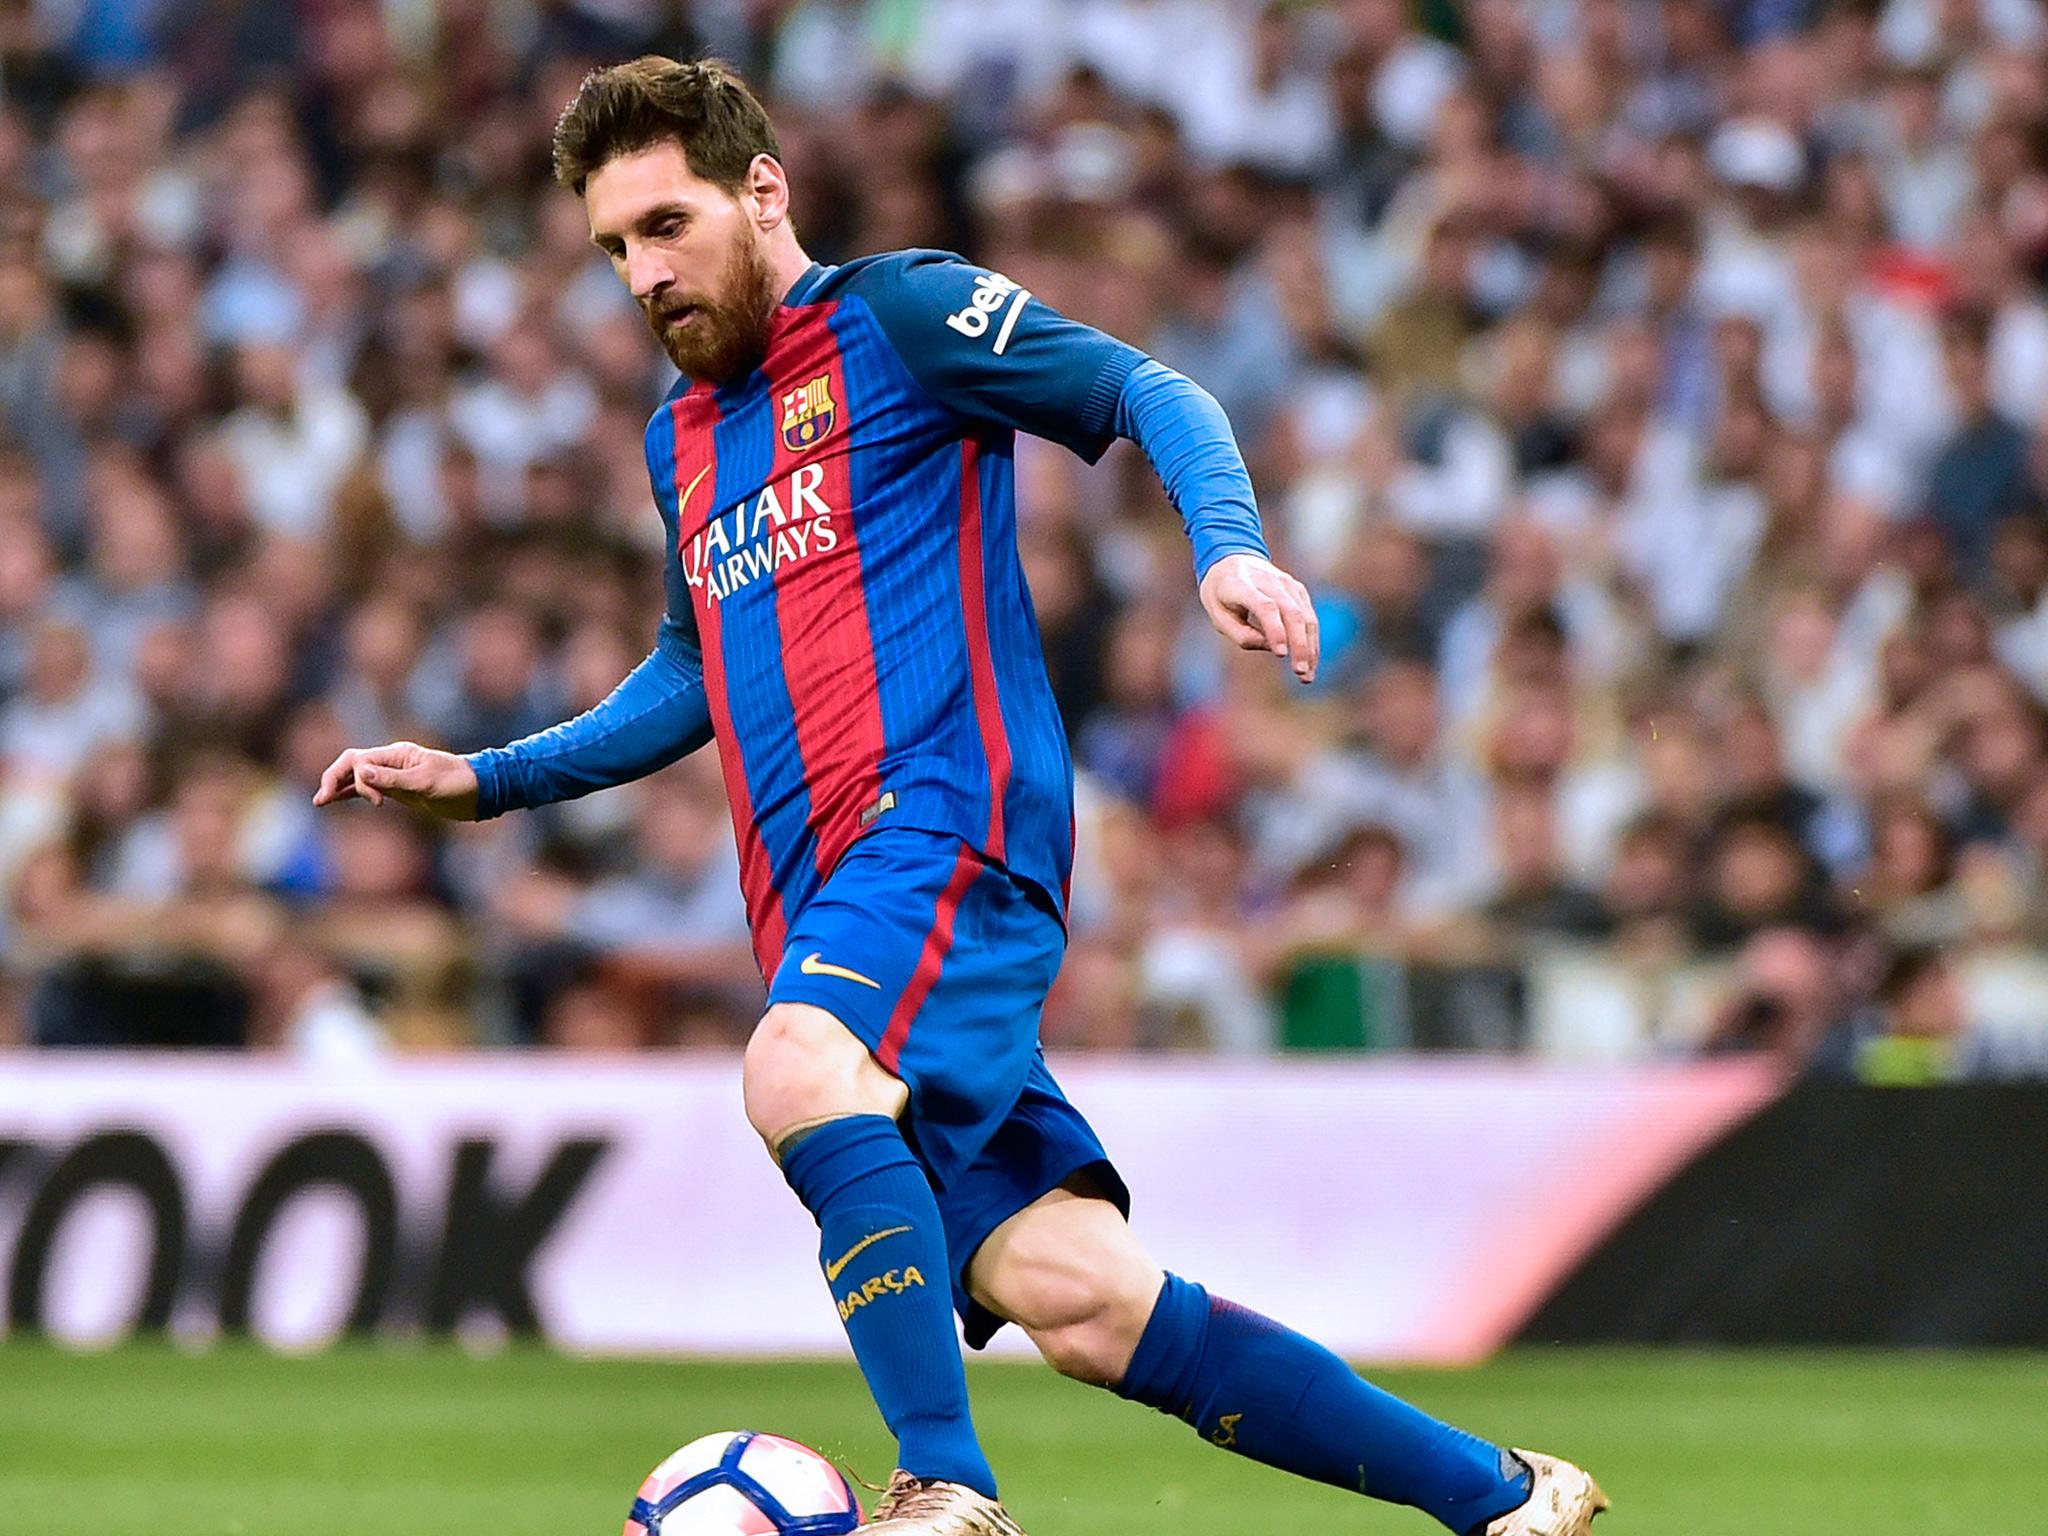 Messi enjoyed a fine game at the Bernabeu (Getty)